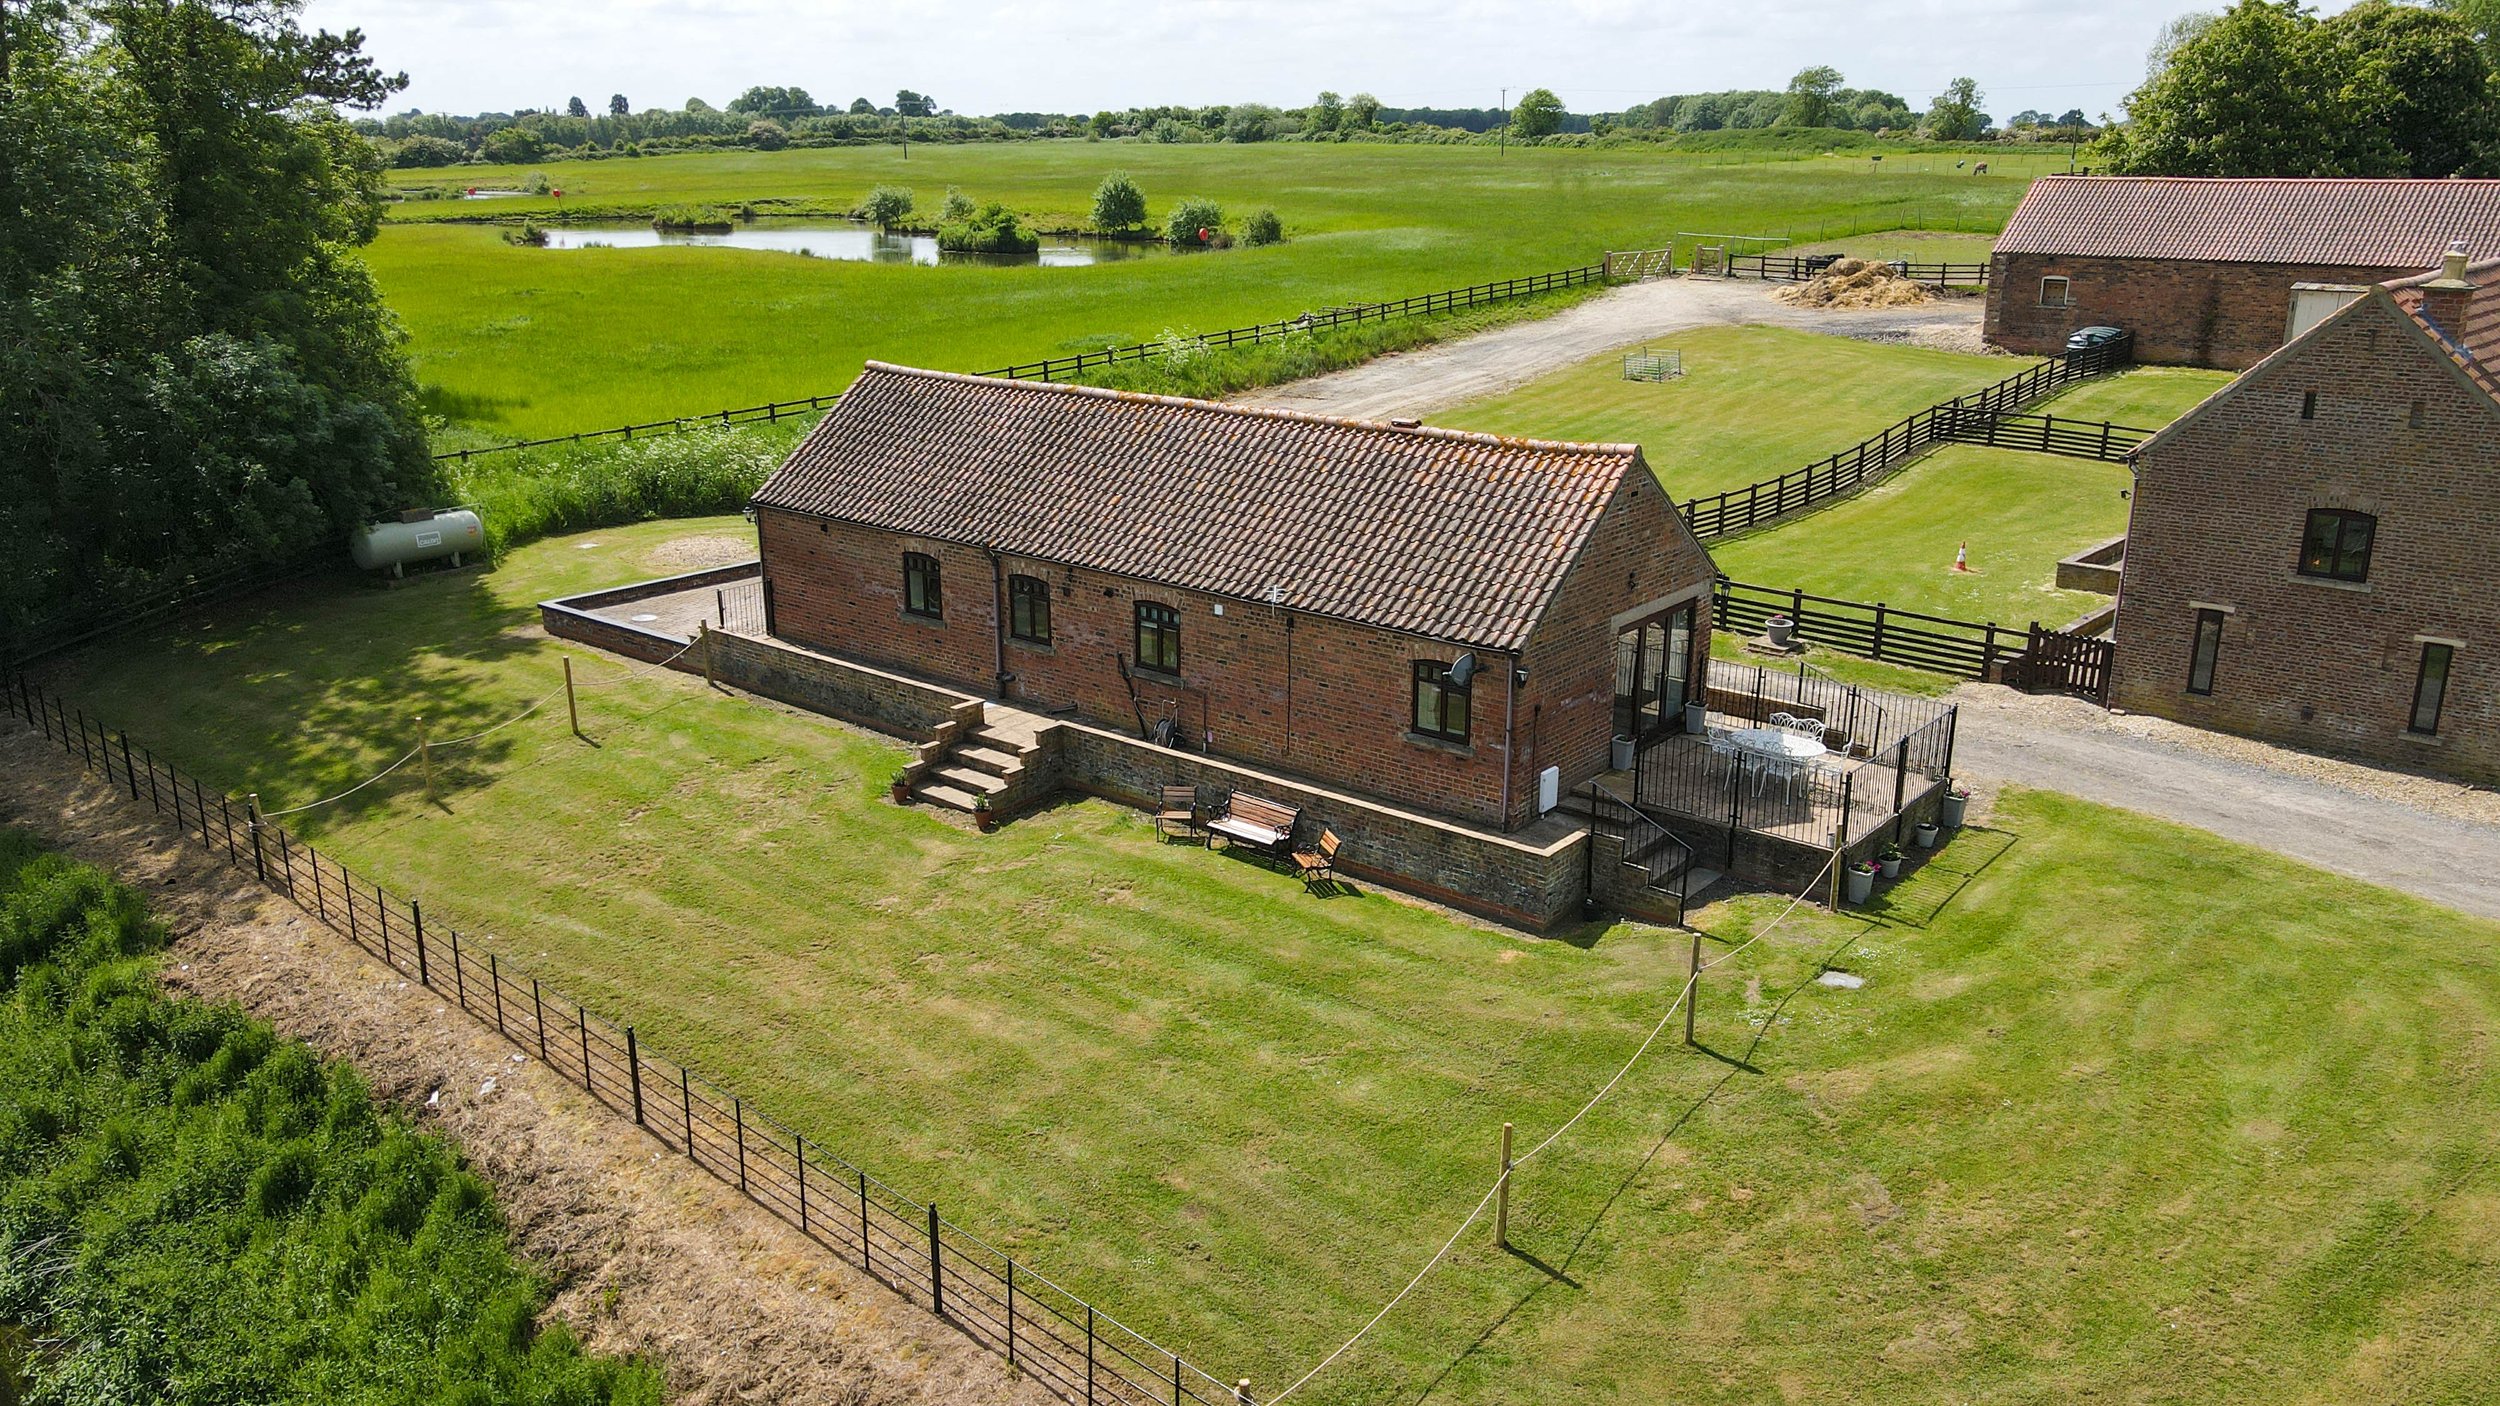 DRONEHOLIDAYCOTTAGES-0692.jpg